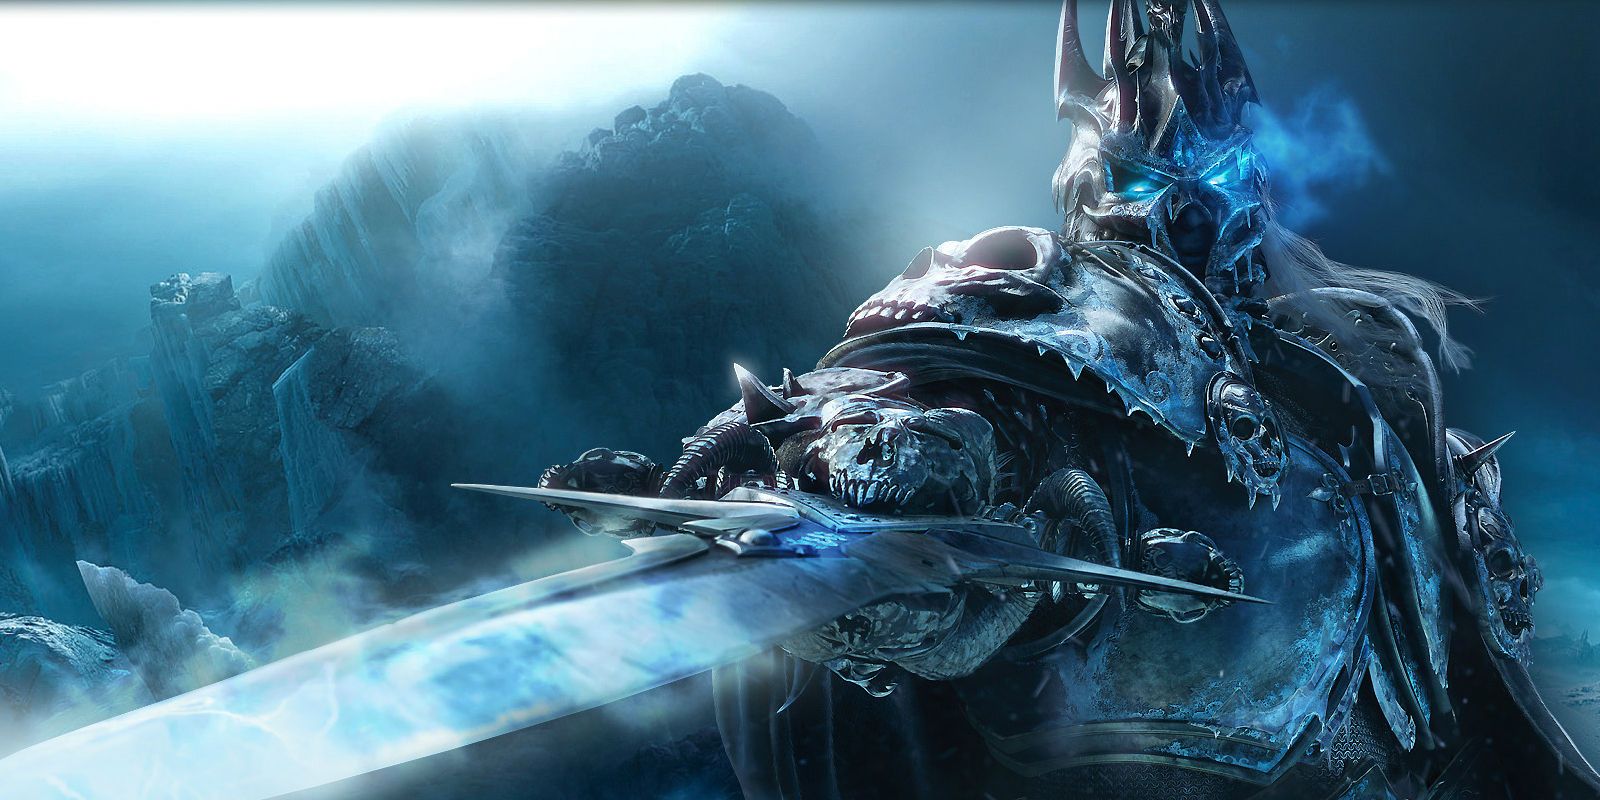 The Lich King from World of Warcraft